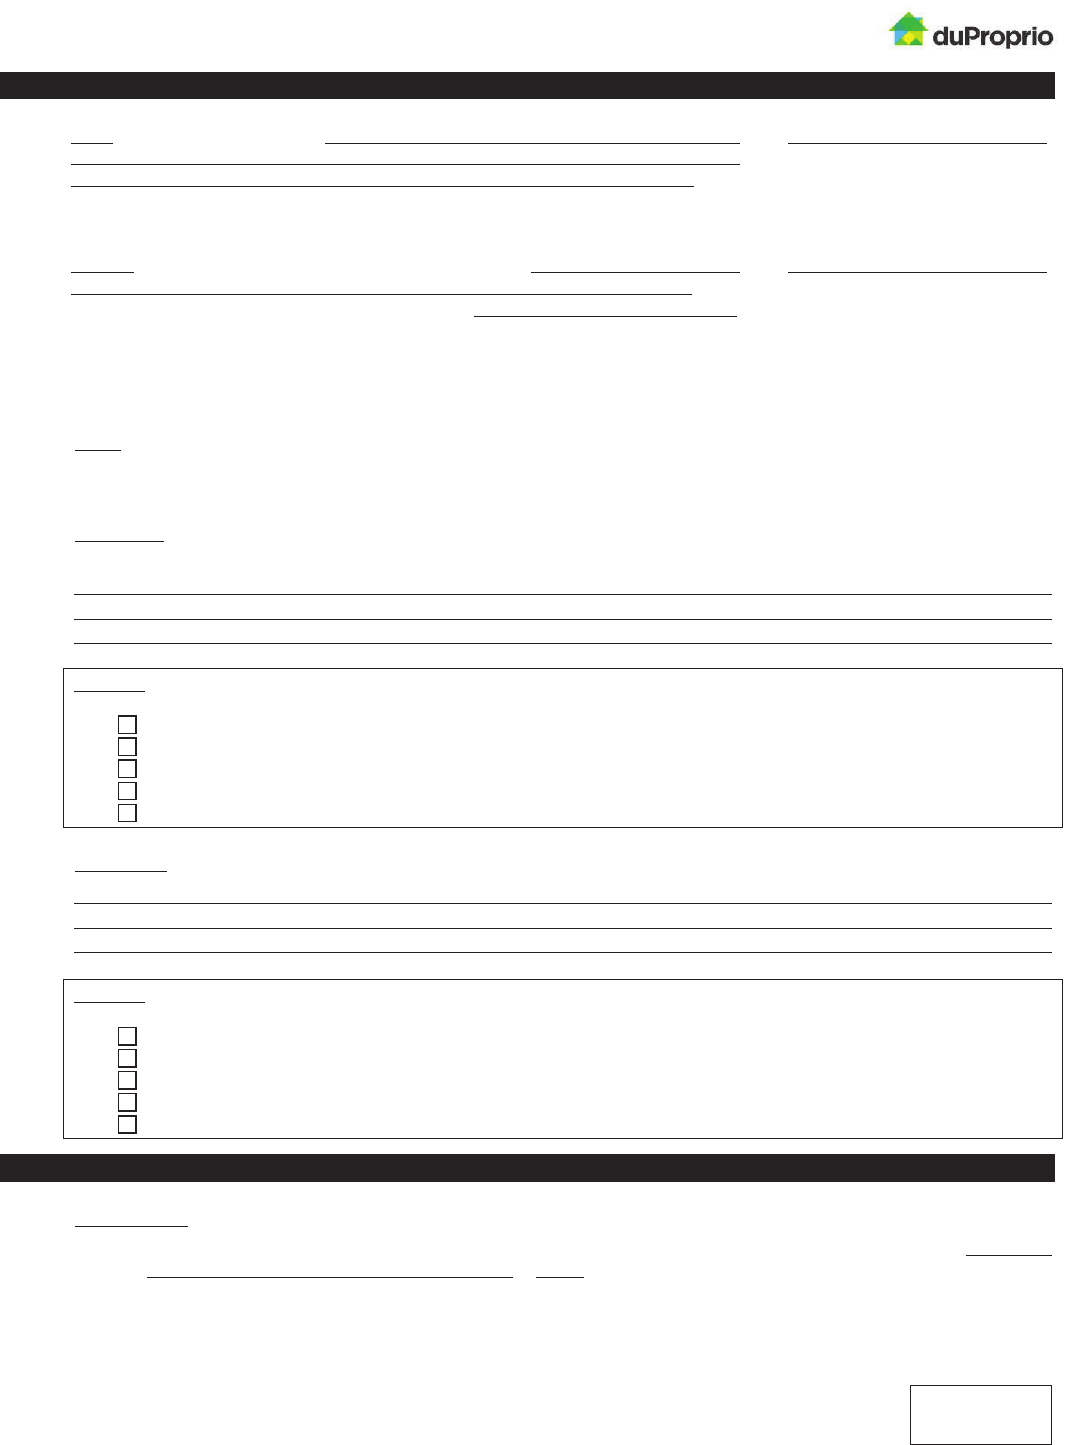 Quebec Offer to Purchase - Commercial Form